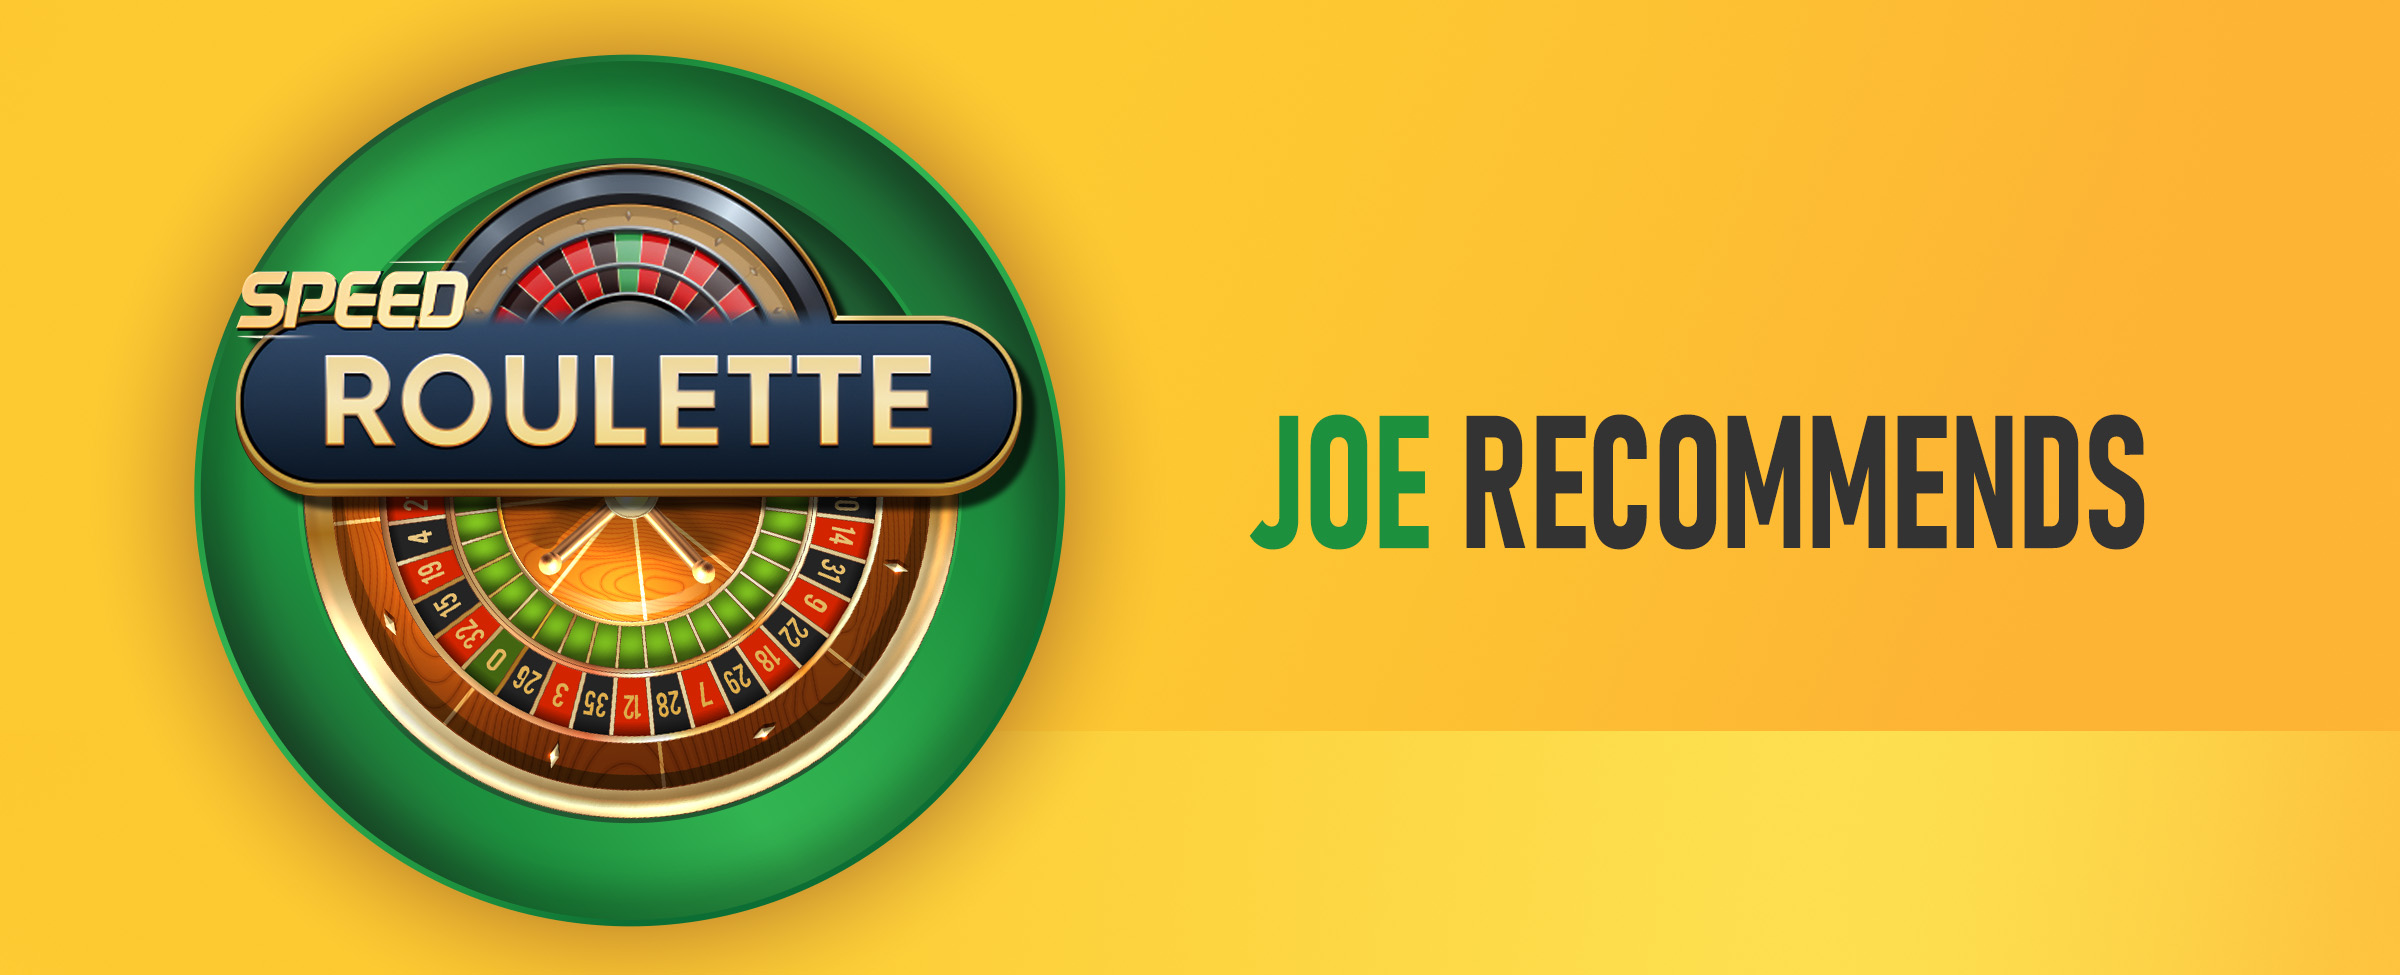 A classic roulette wheel features, alongside the logo for ‘Speed Roulette’ and the wording ‘Joe Recommends’ on a yellow background.